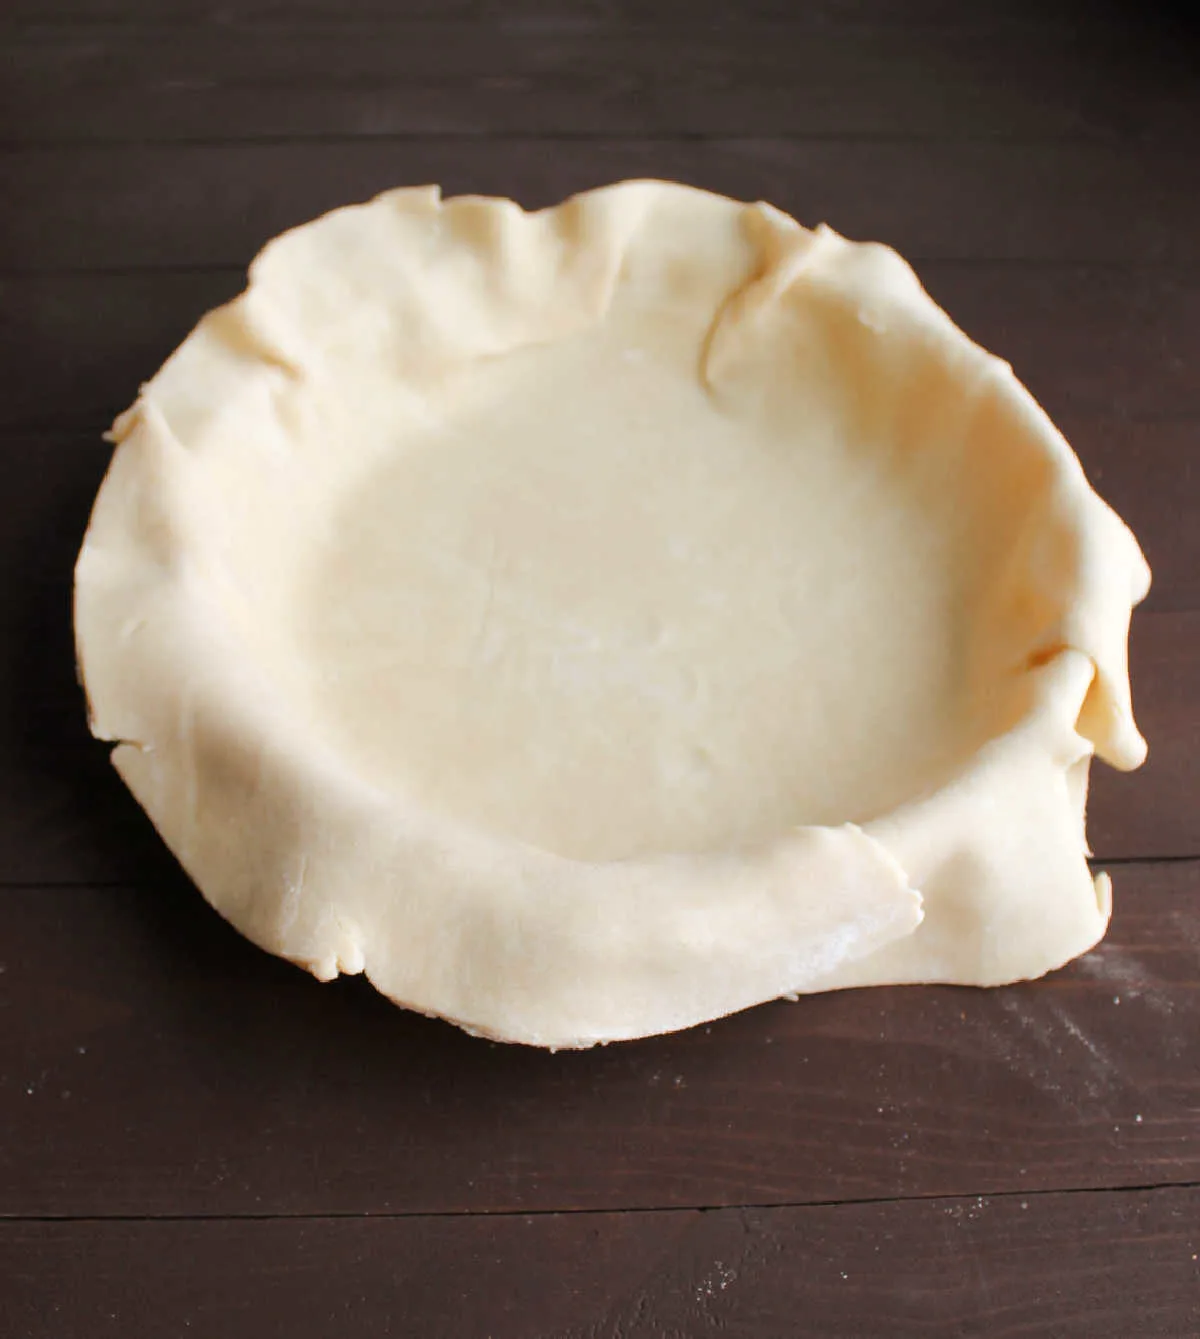 pie crust dough in pie pan, ready to be trimmed and filled.